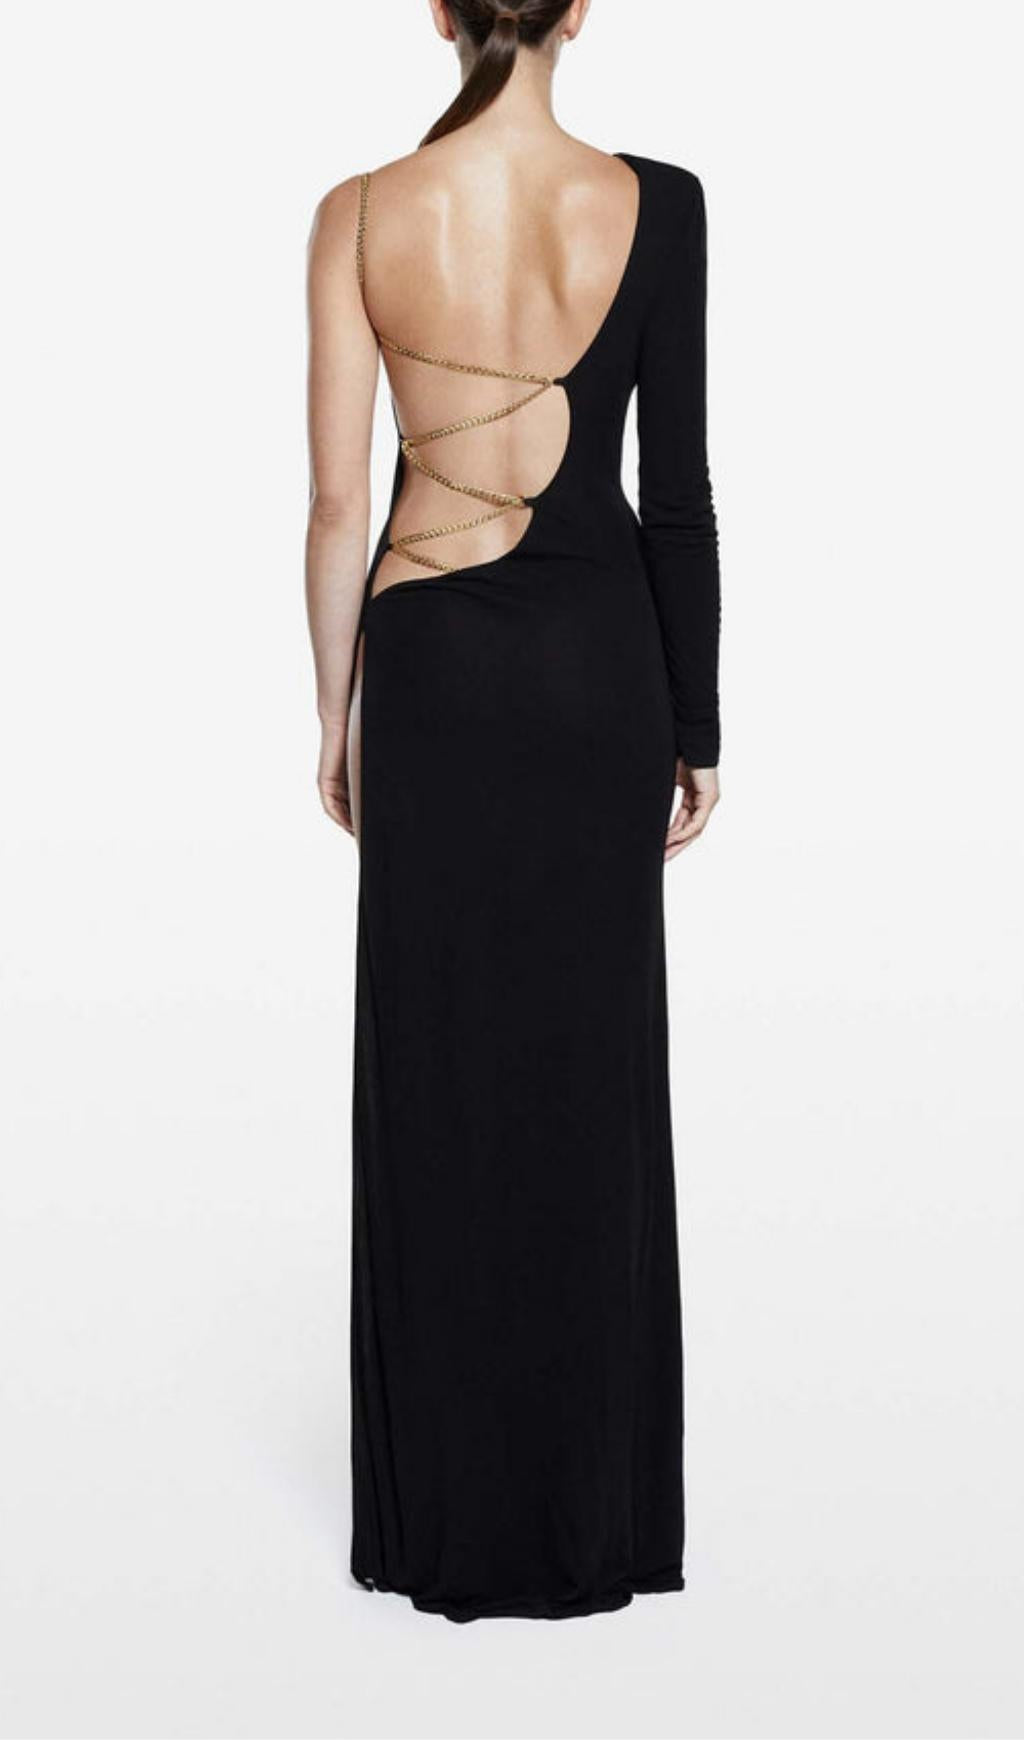 ONE SHOUDLER BACKLESS MAXI DRESS IN BLACK